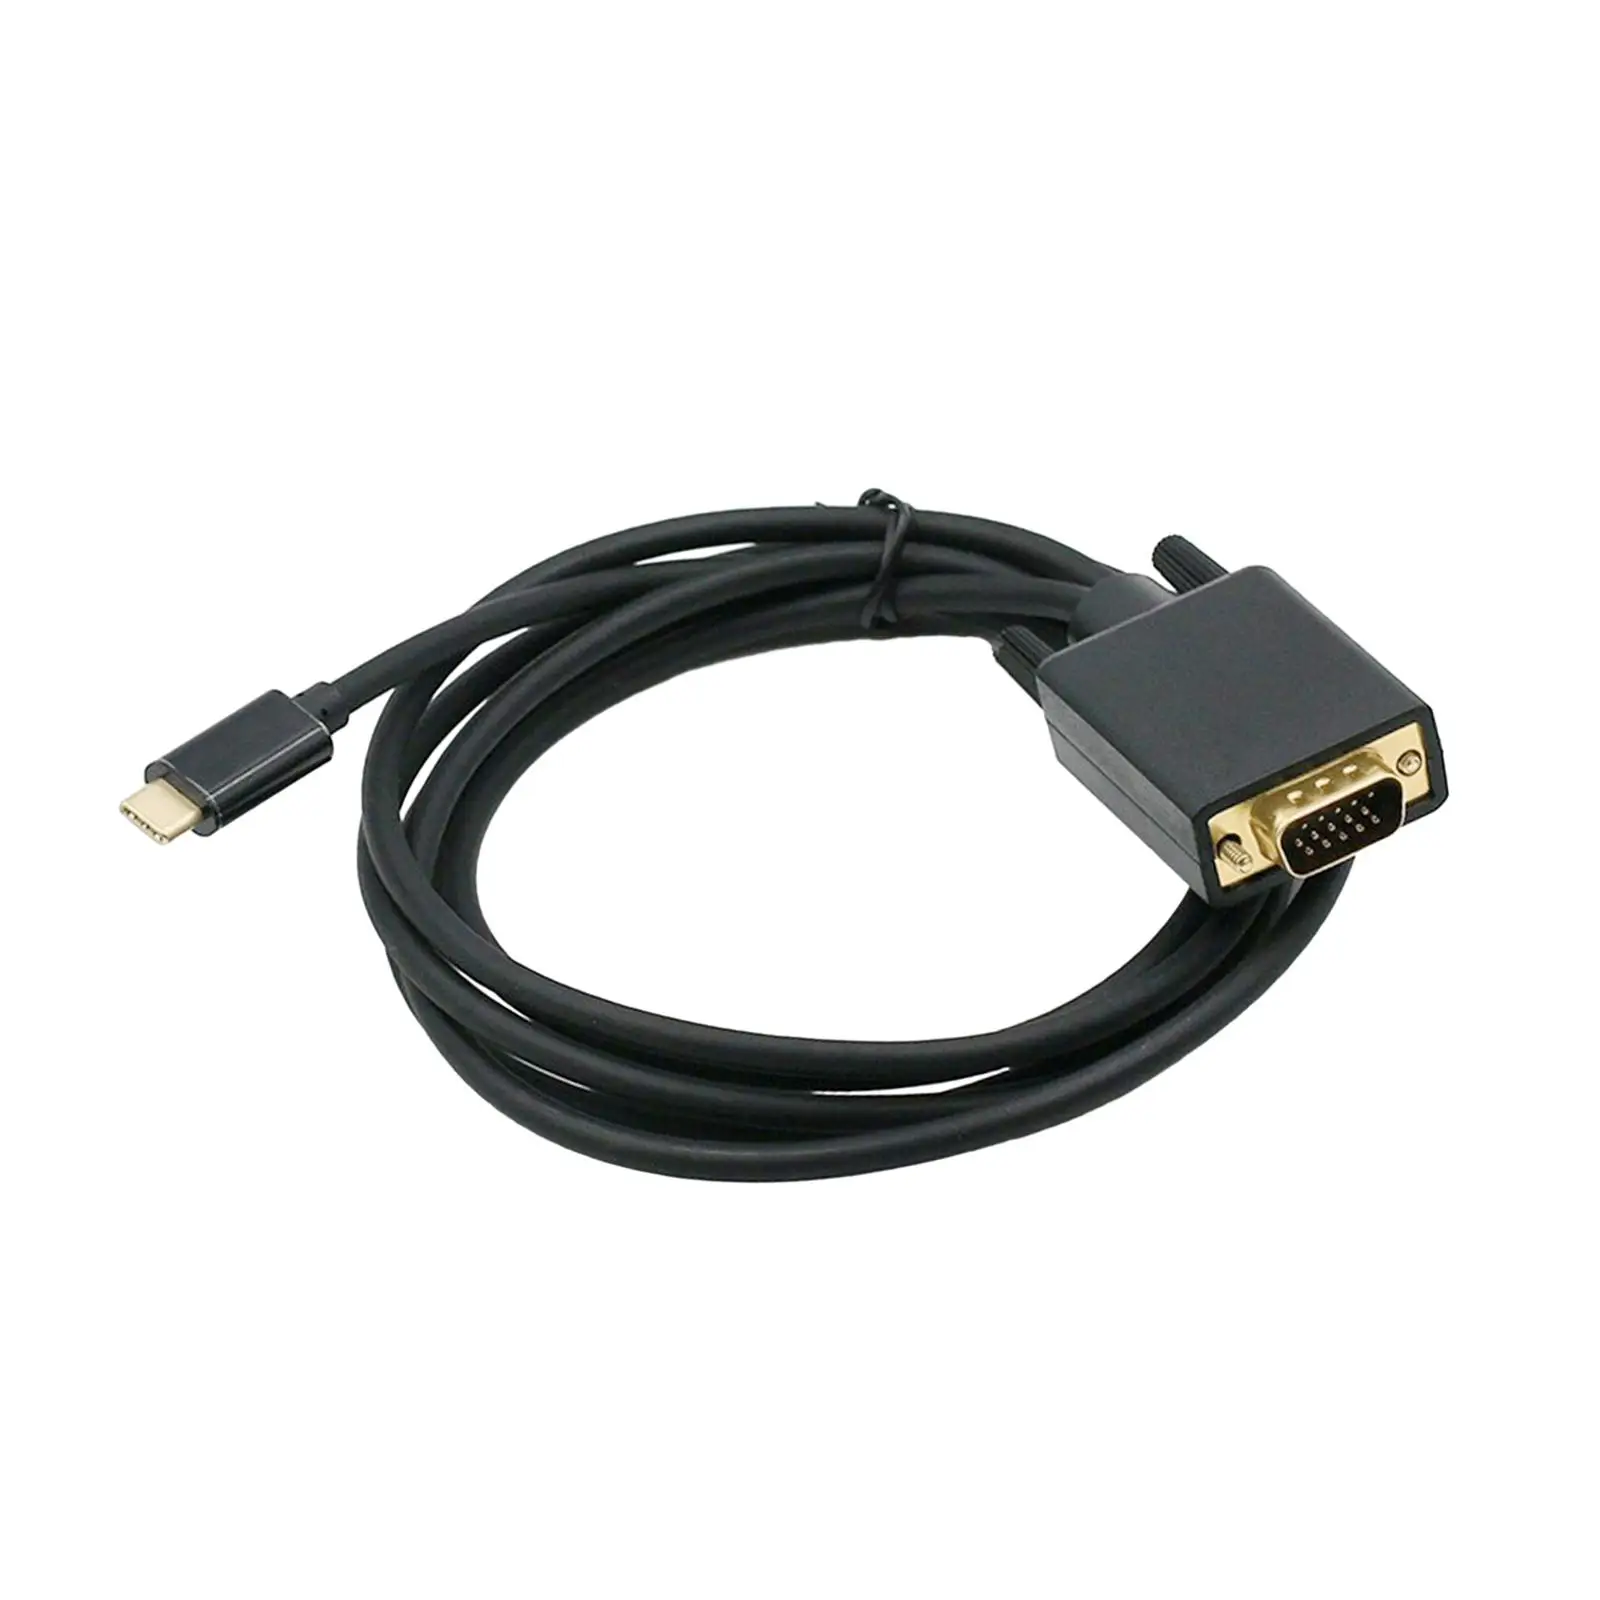 USB C to VGA Cable Tablet Plug and Play Monitors Projectors USB Type C to VGA Demo Computer Smartphones 1080P 6ft Adapter Cable